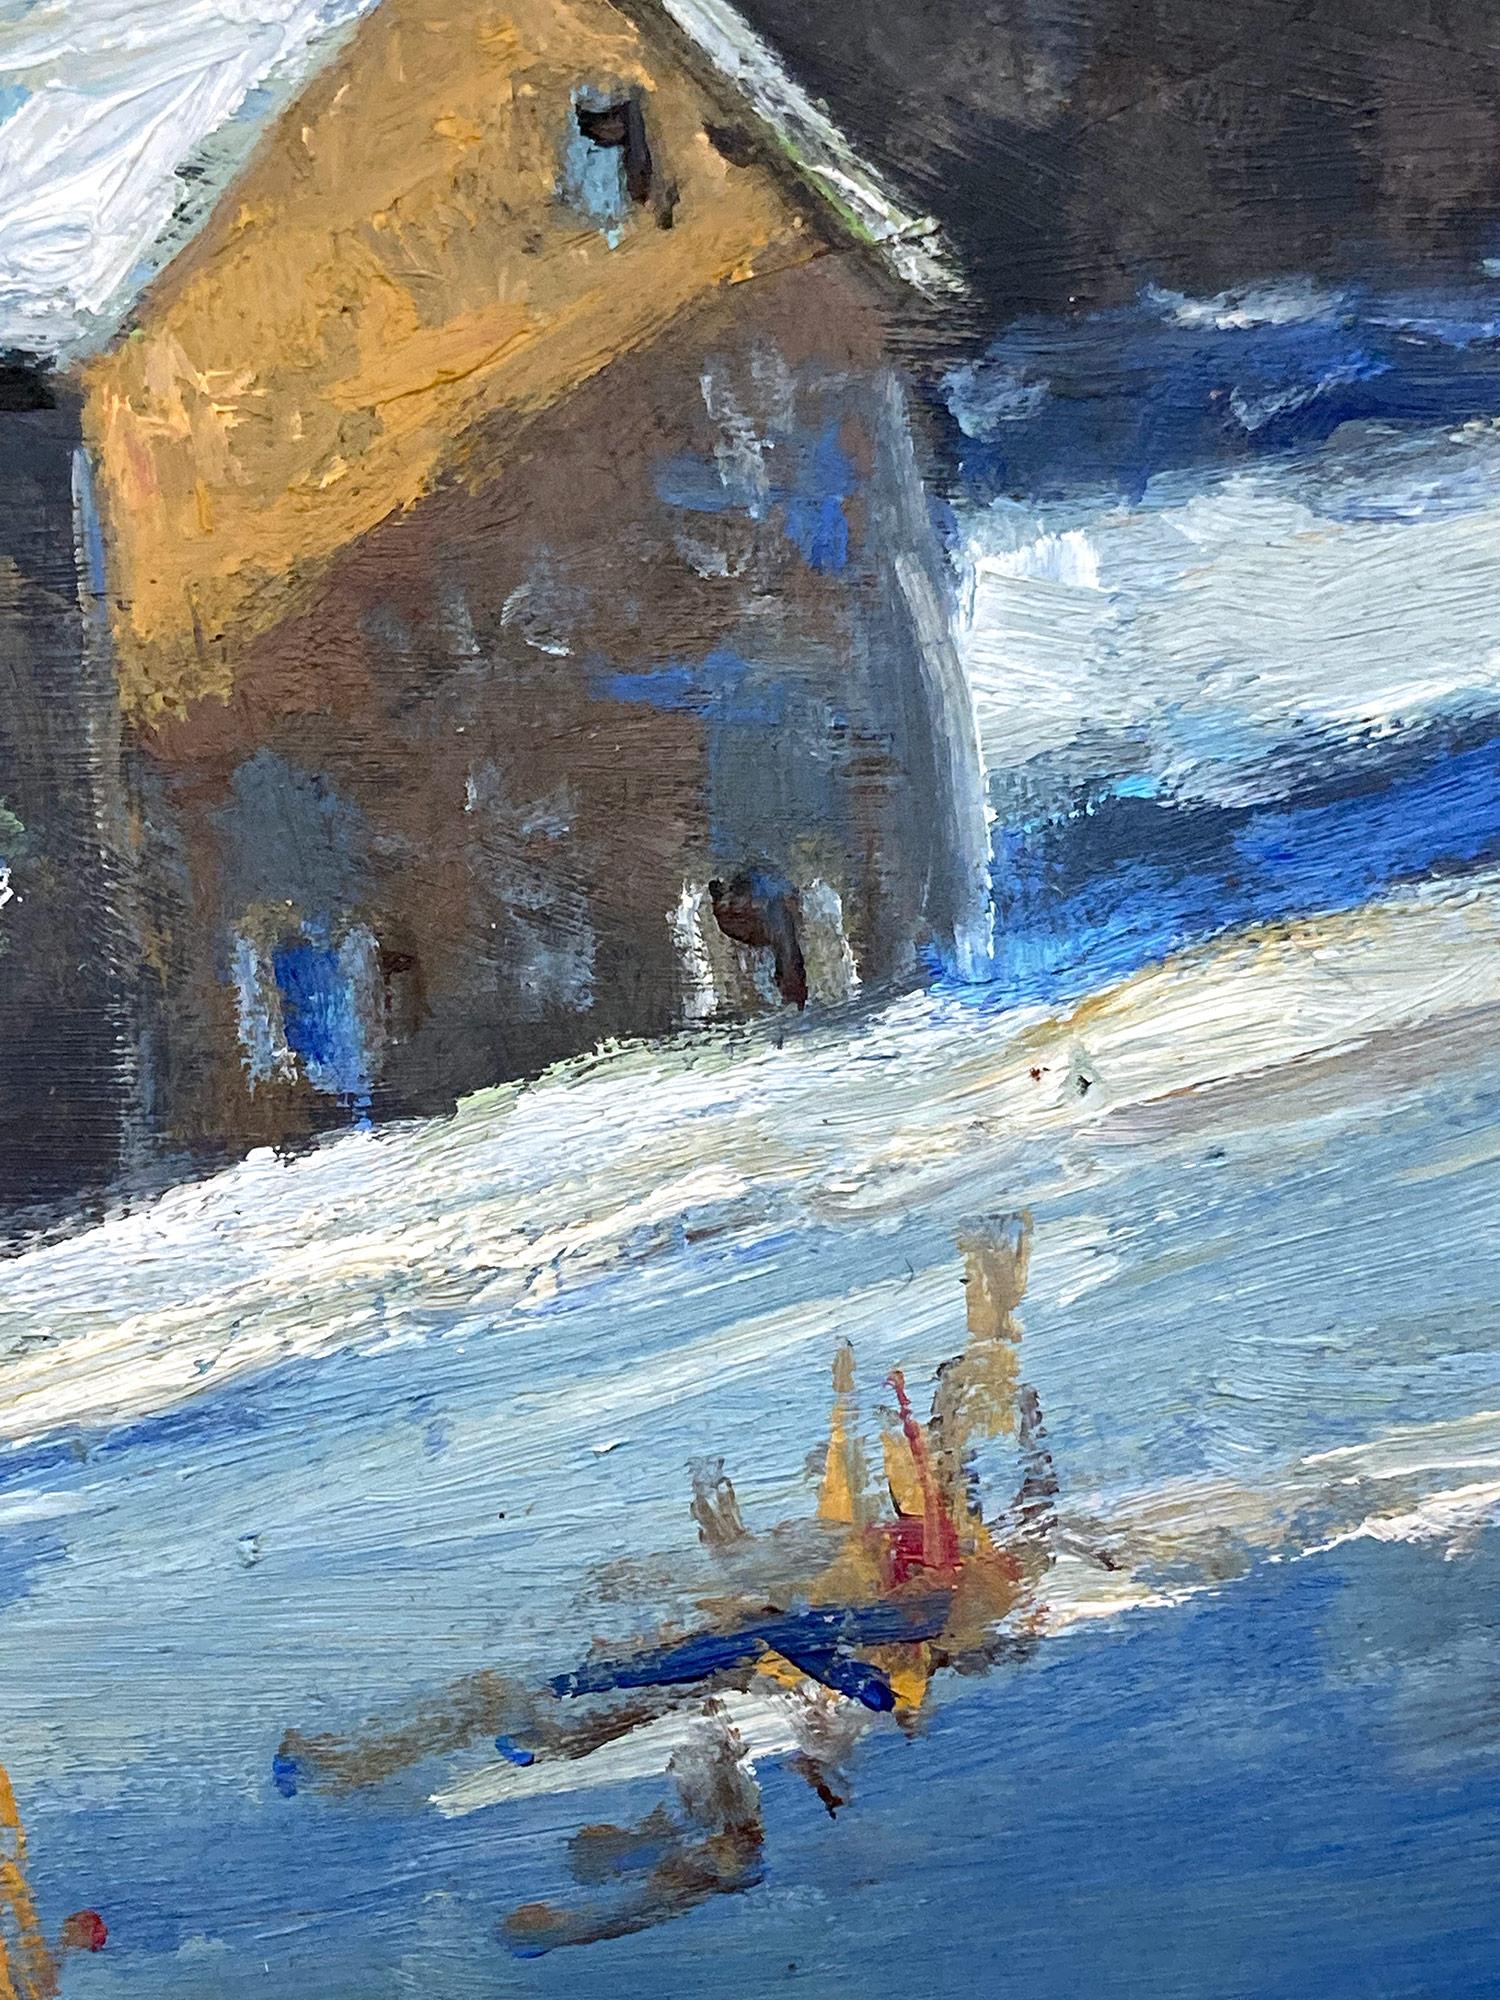 Impressionist winter pastoral scene of a quaint snow covered home by Upper Bucks County, PA. Willett has portrayed this charming piece in a most intimate, yet energetic way, and has packed much feeling into this miniature work. It is almost as if we